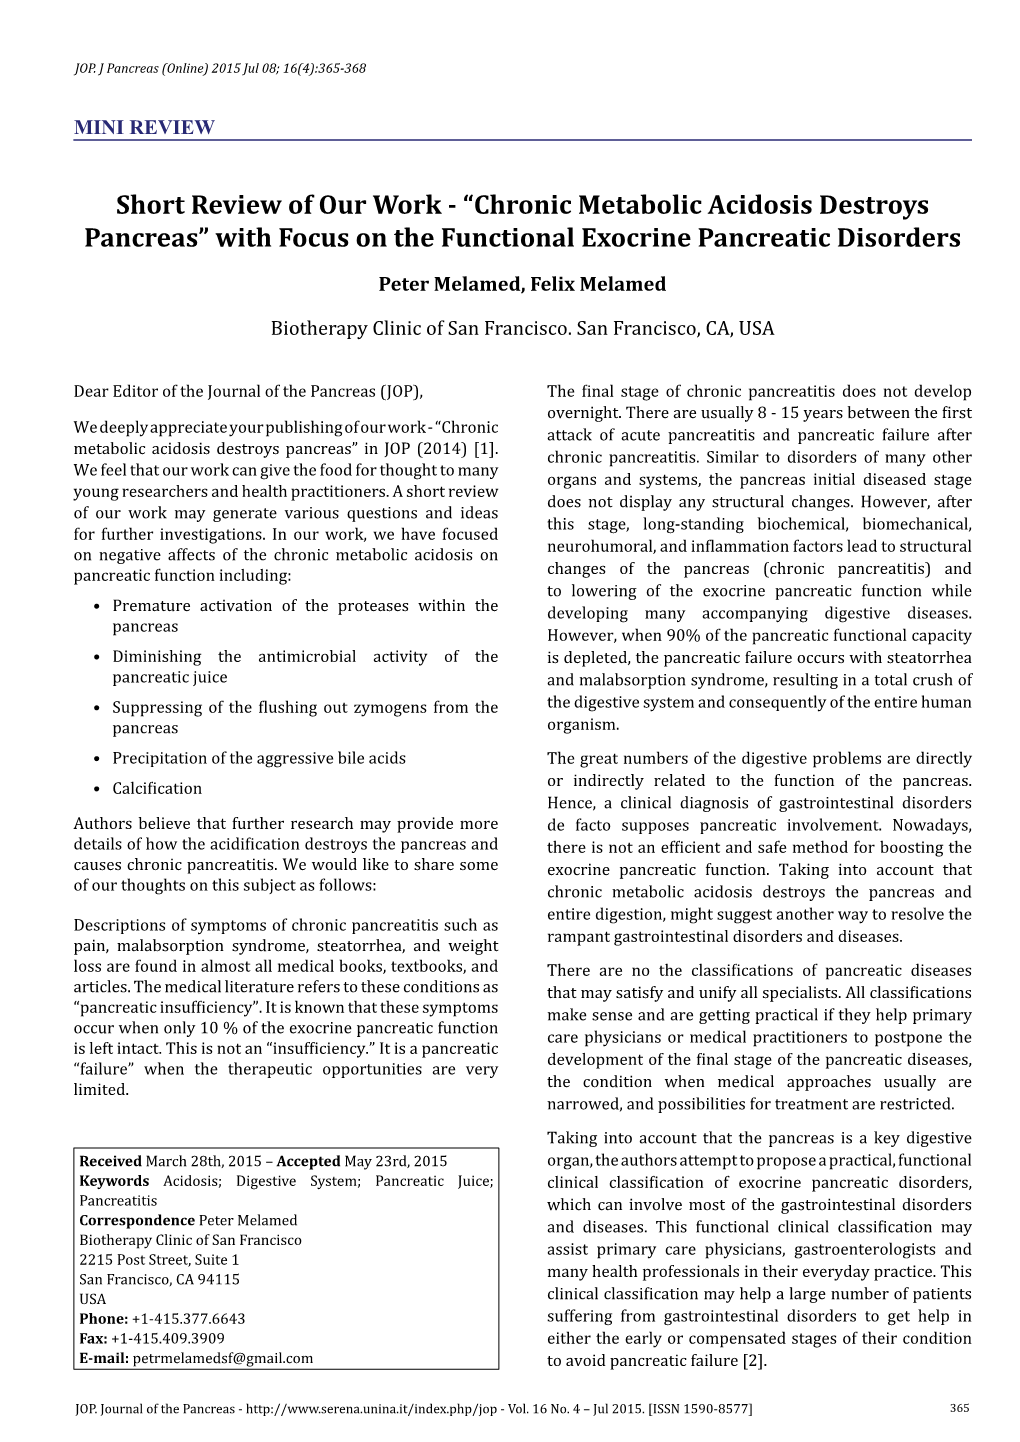 With Focus on the Functional Exocrine Pancreatic Disorders